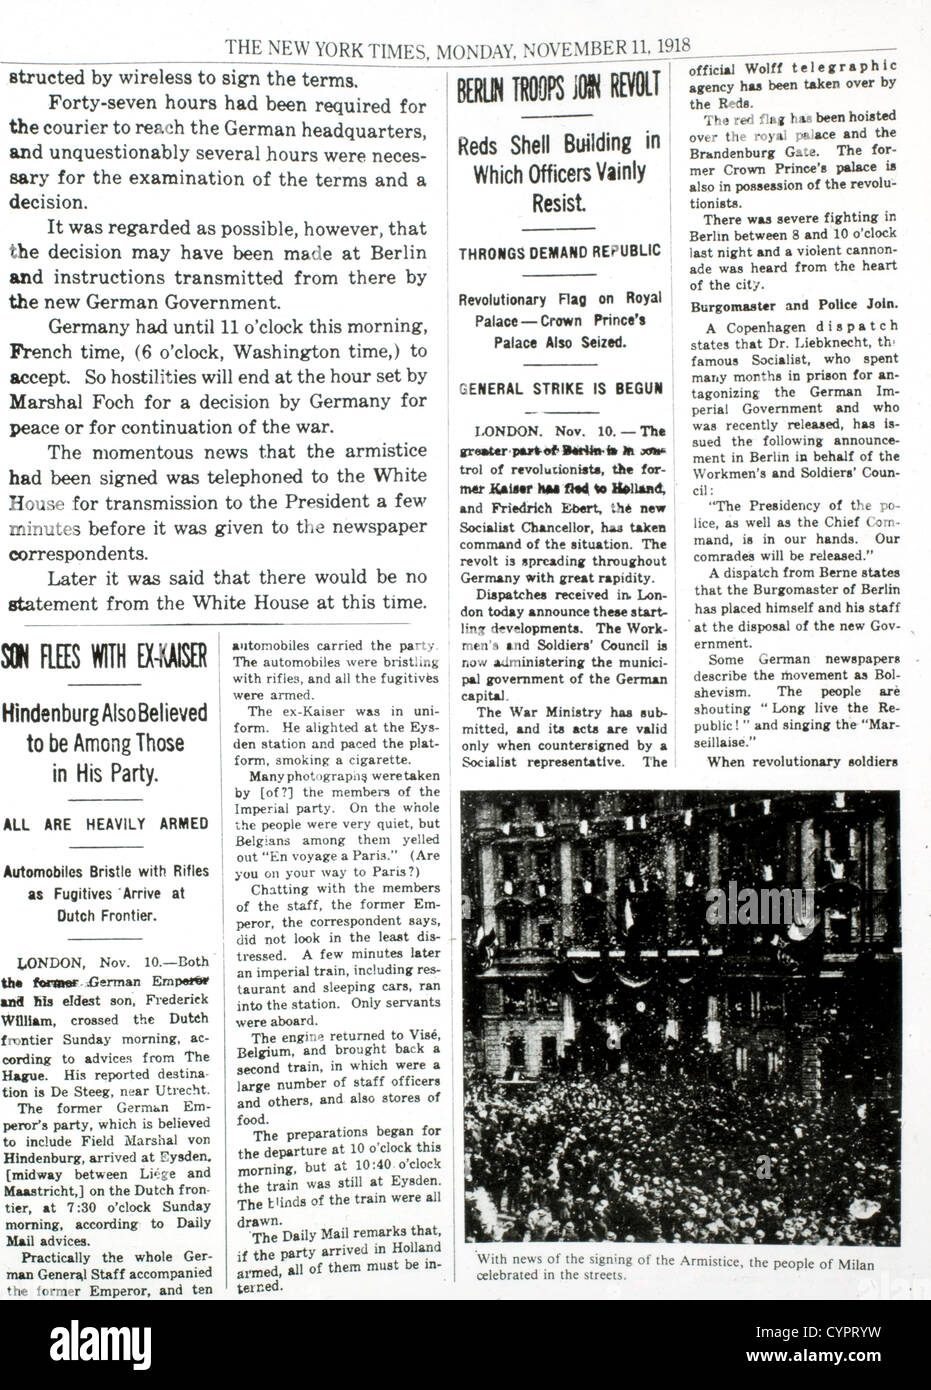 Armistice Signed, End of the War, New York Times Interior Page, November 11, 1918 Stock Photo